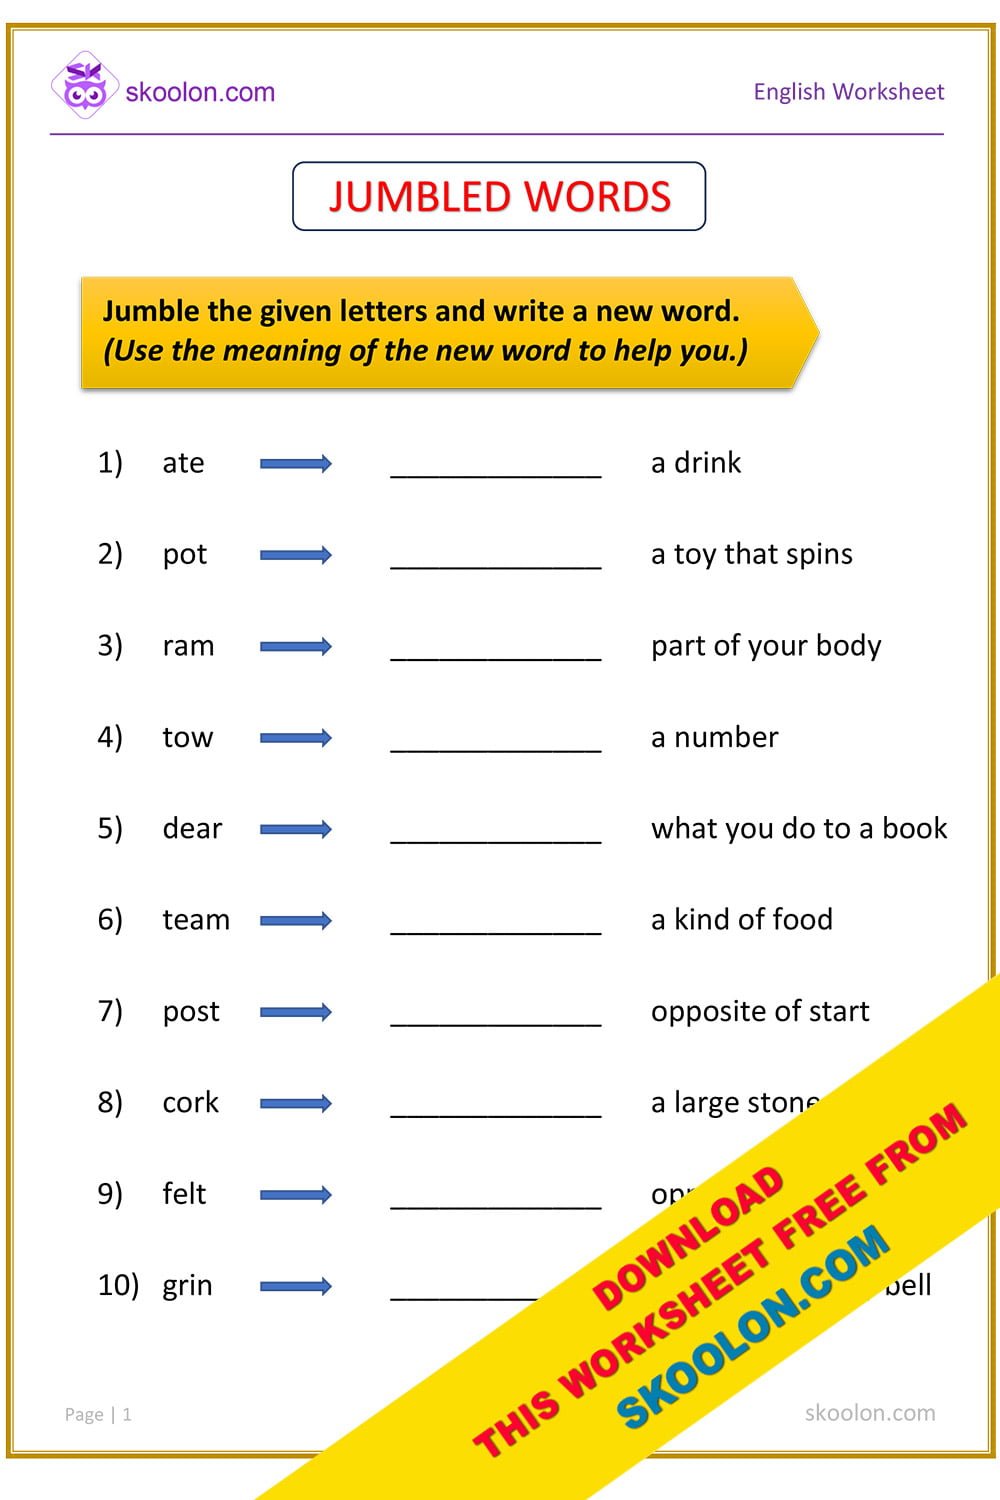 jumbled-words-worksheets-for-class-3-archives-skoolon